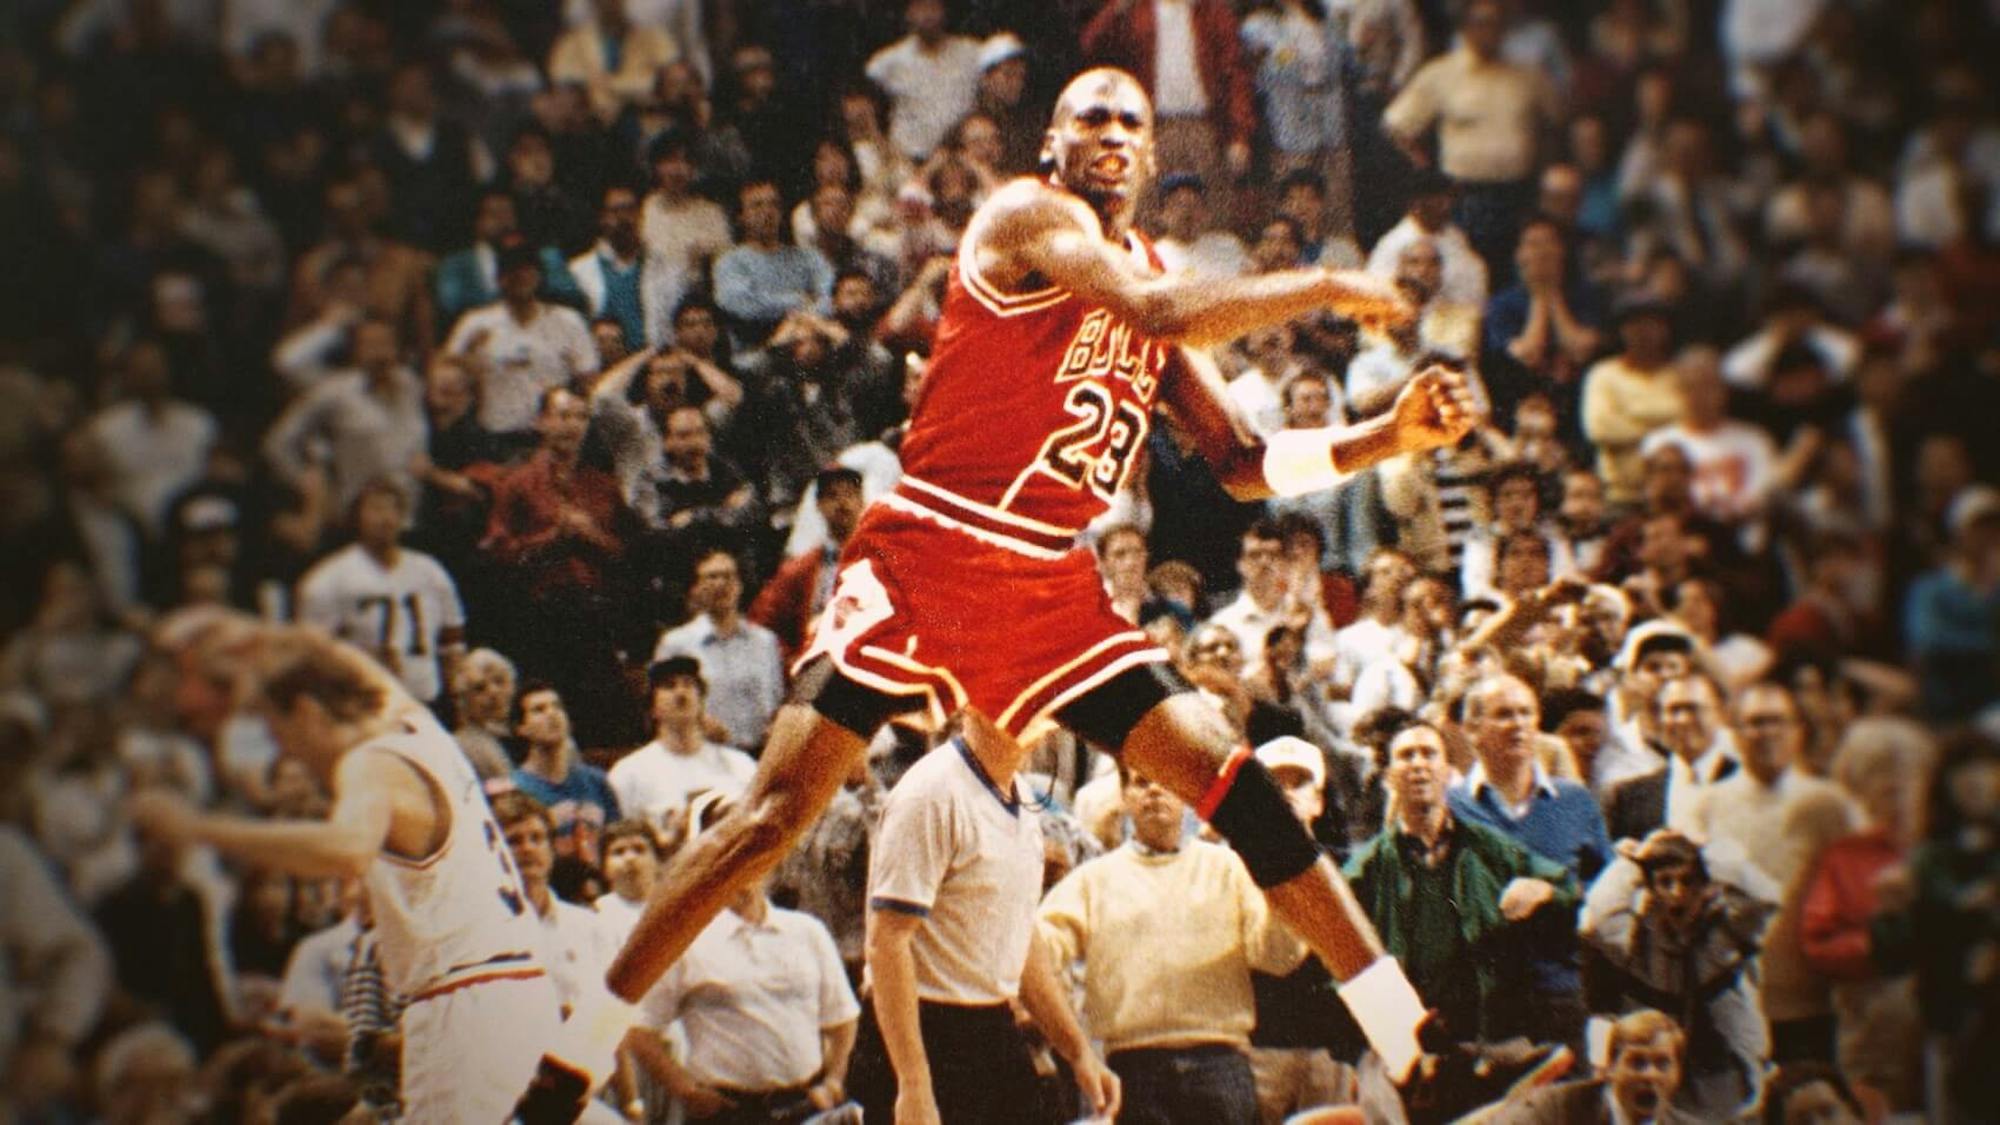 Michael Jordan jumps in the center of this lively shot. The people in the background appear on the edge of their seats. Jordan wears a red uniform with the number 23.